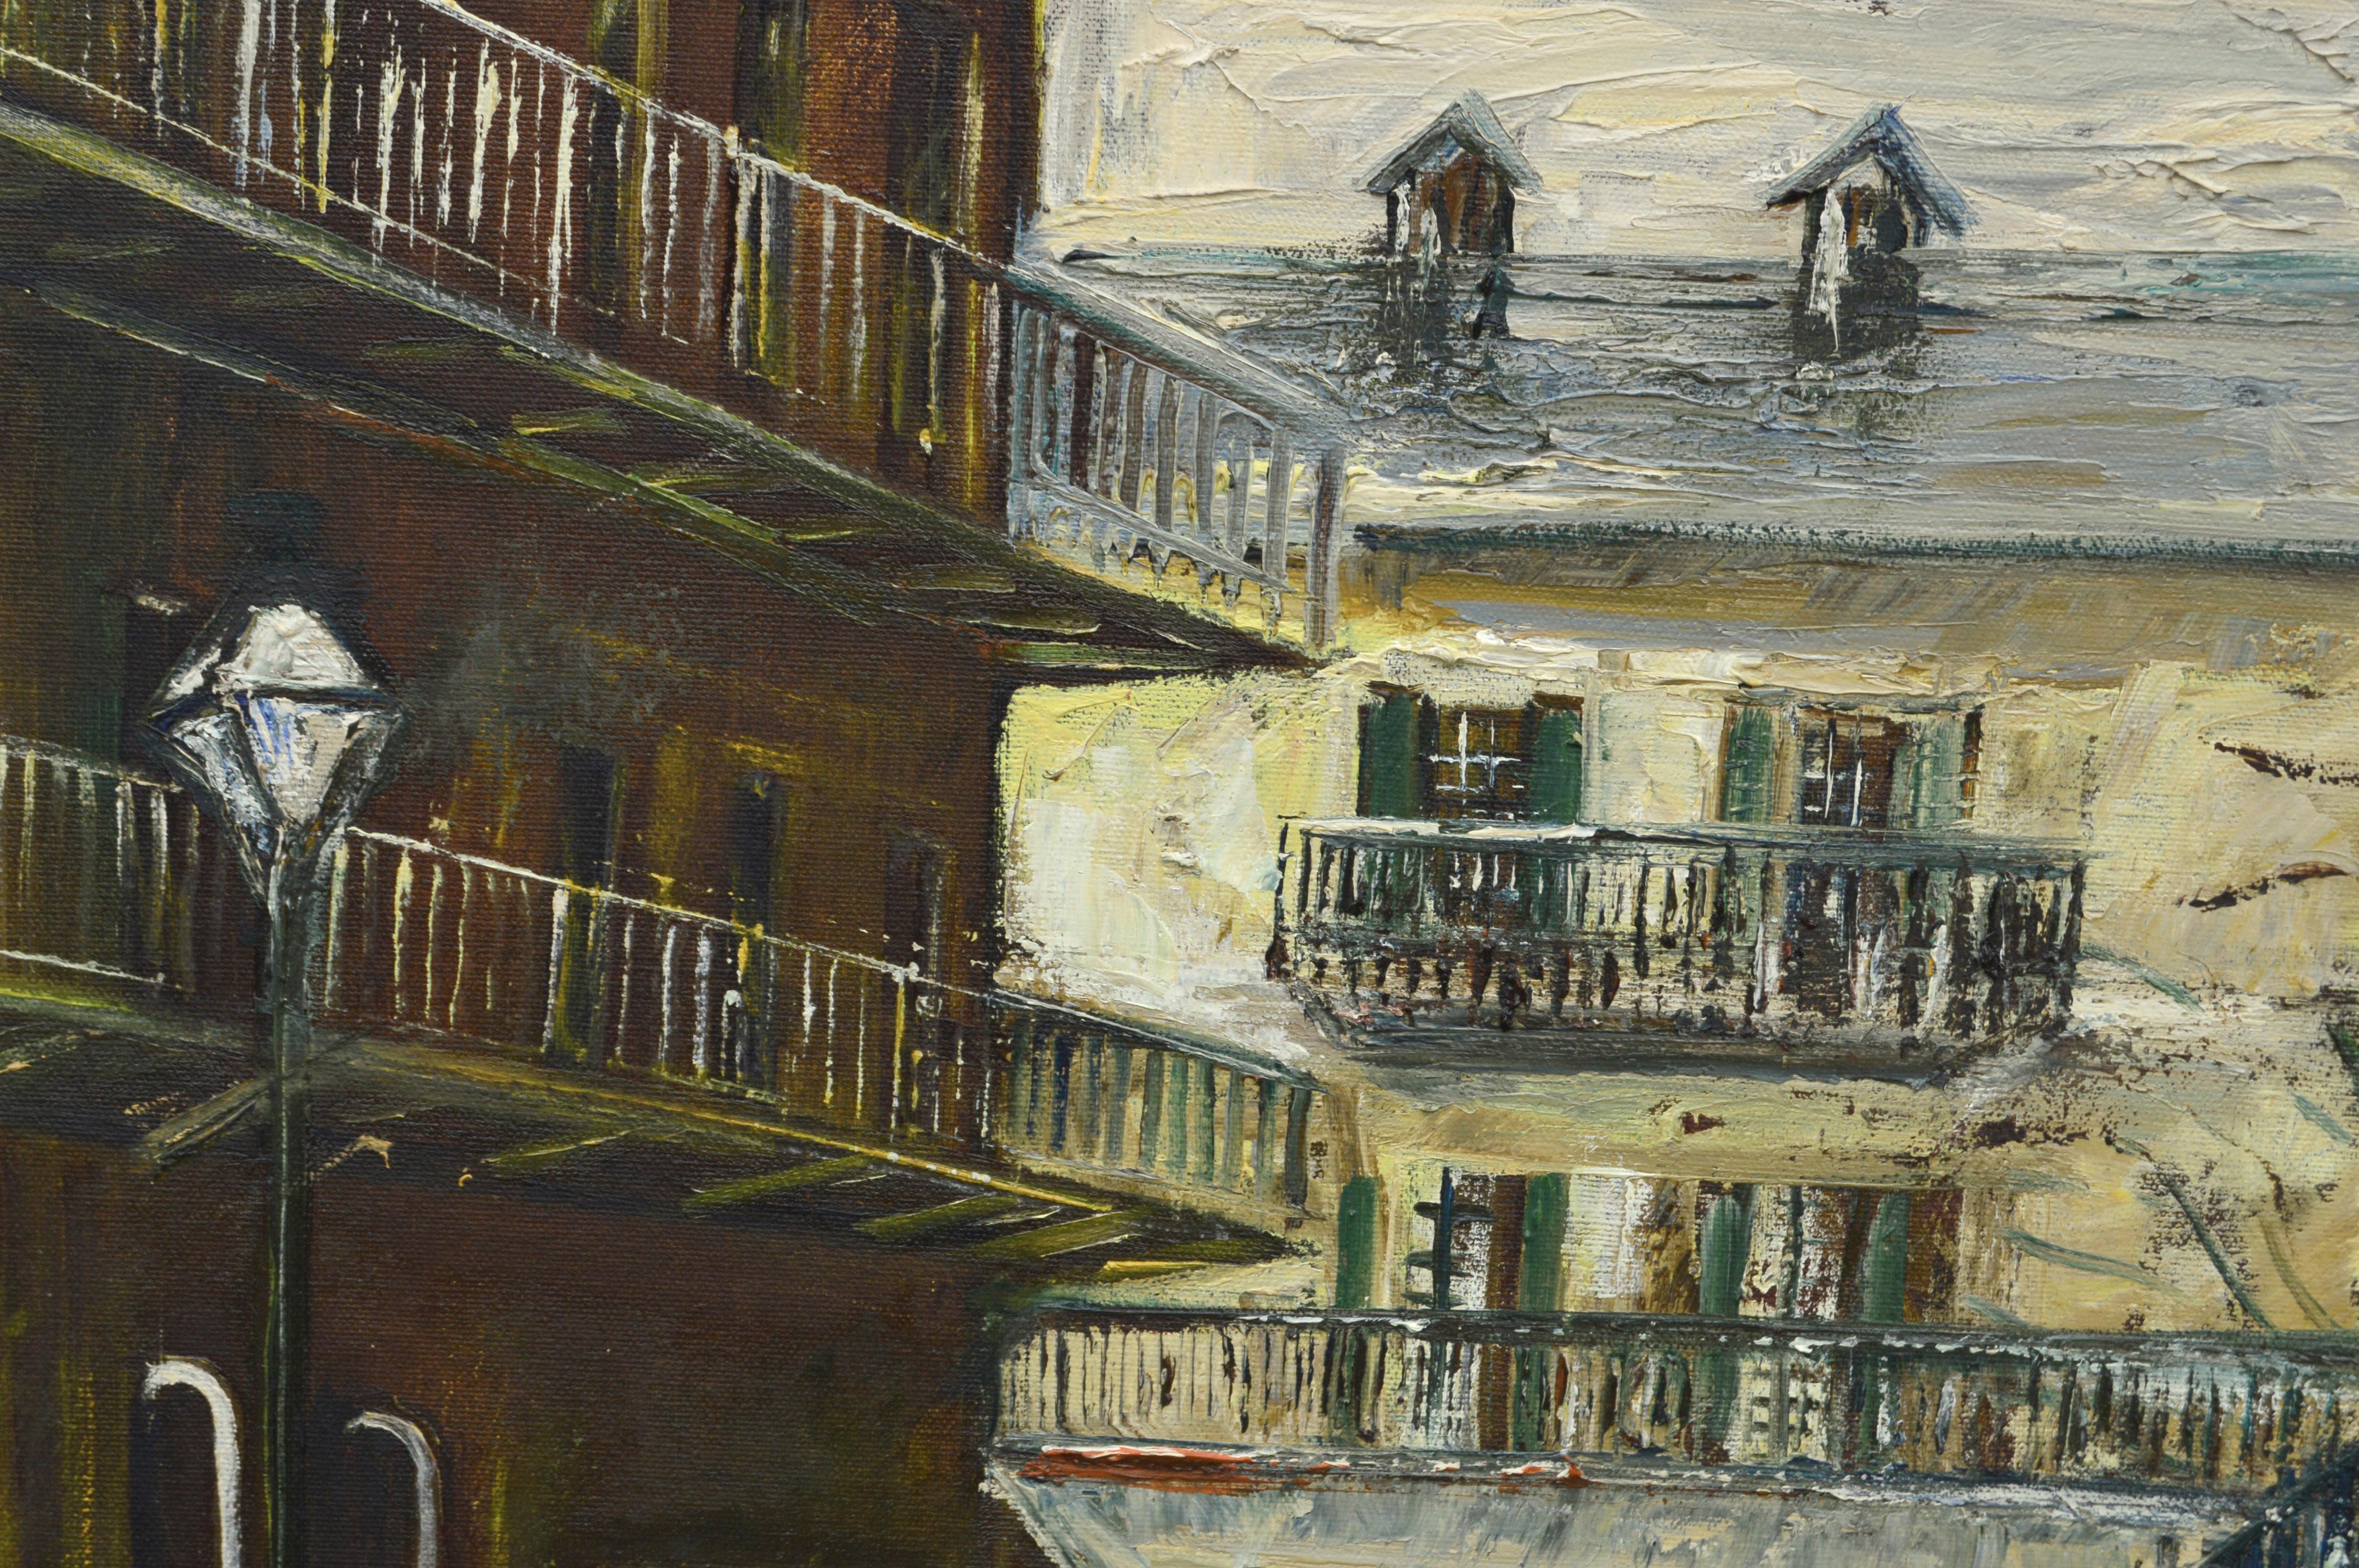 French Quarter Street - Mid Century New Orleans Landscape  - Painting by Melba Dukes Gianelloni